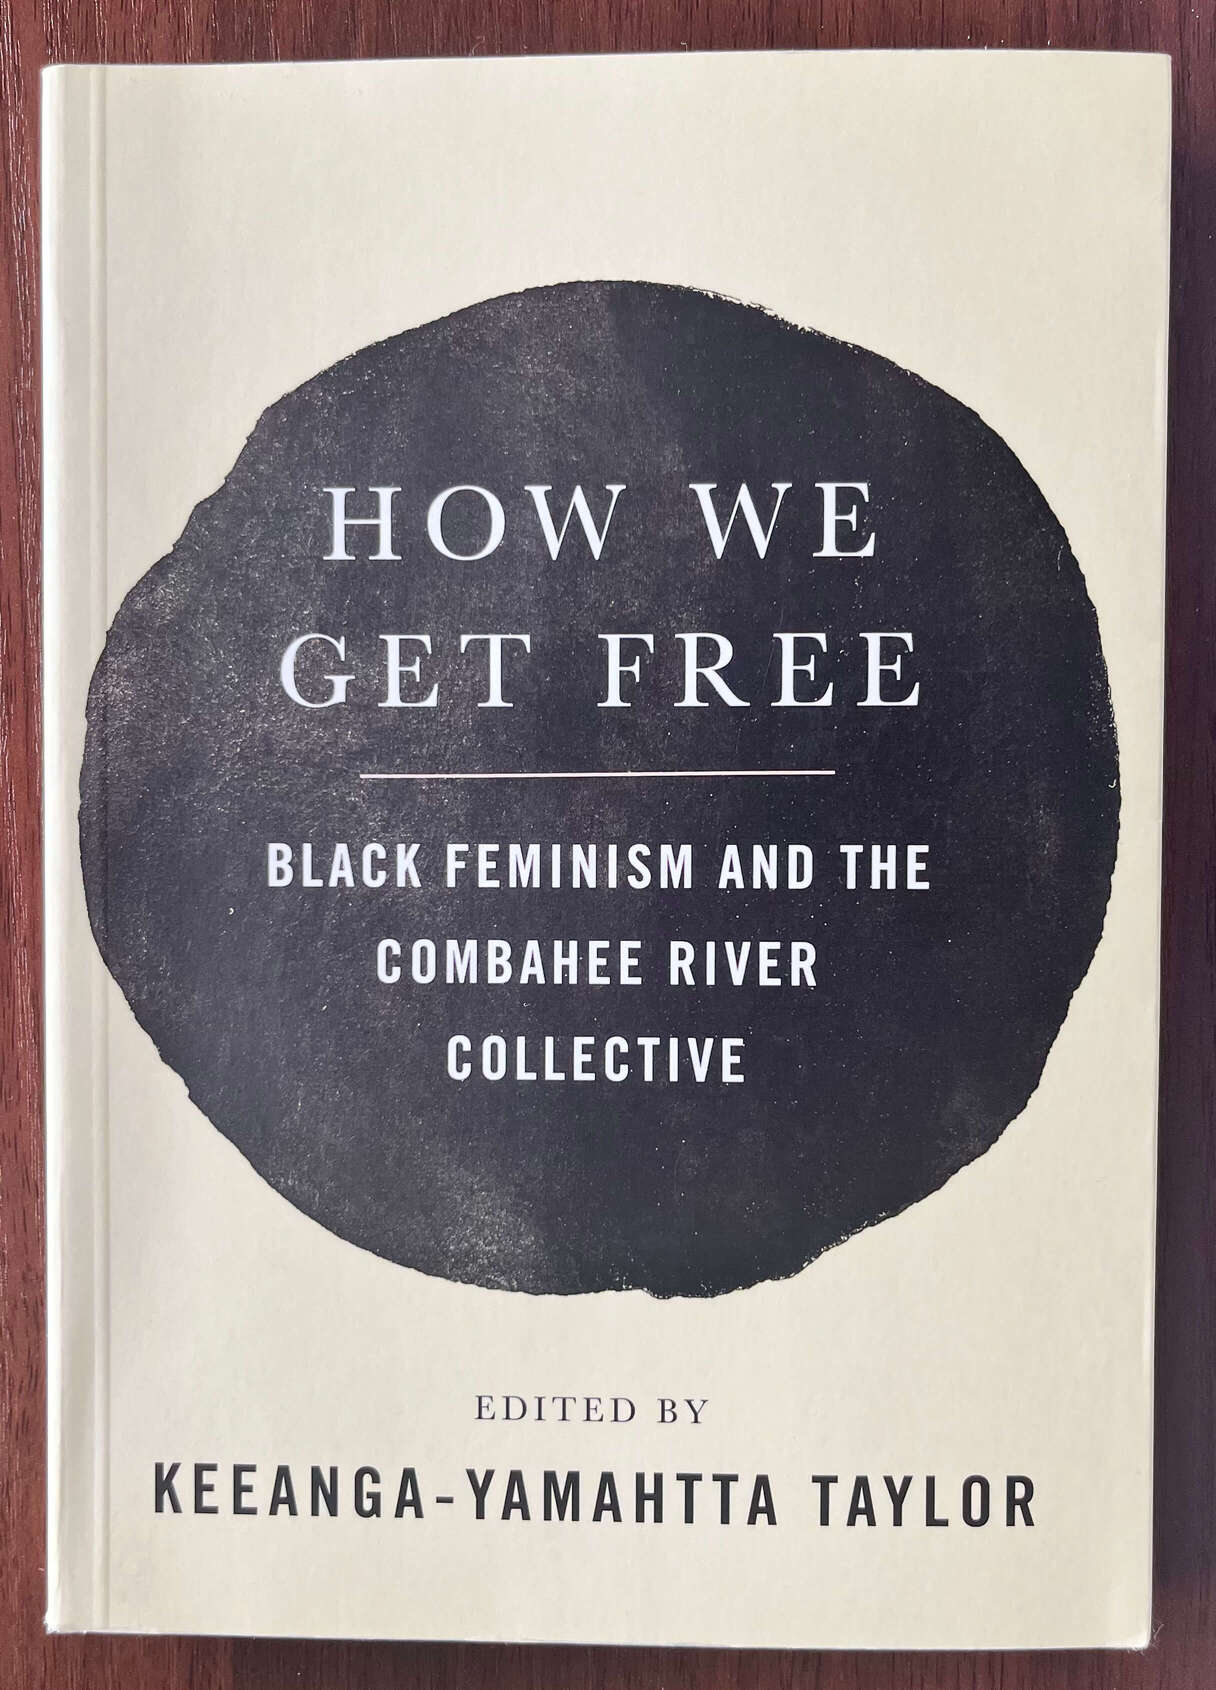 “How We Get Free: Black Feminism and the Combahee River Collective” edited by Keeanga-Yamahtta Taylor.